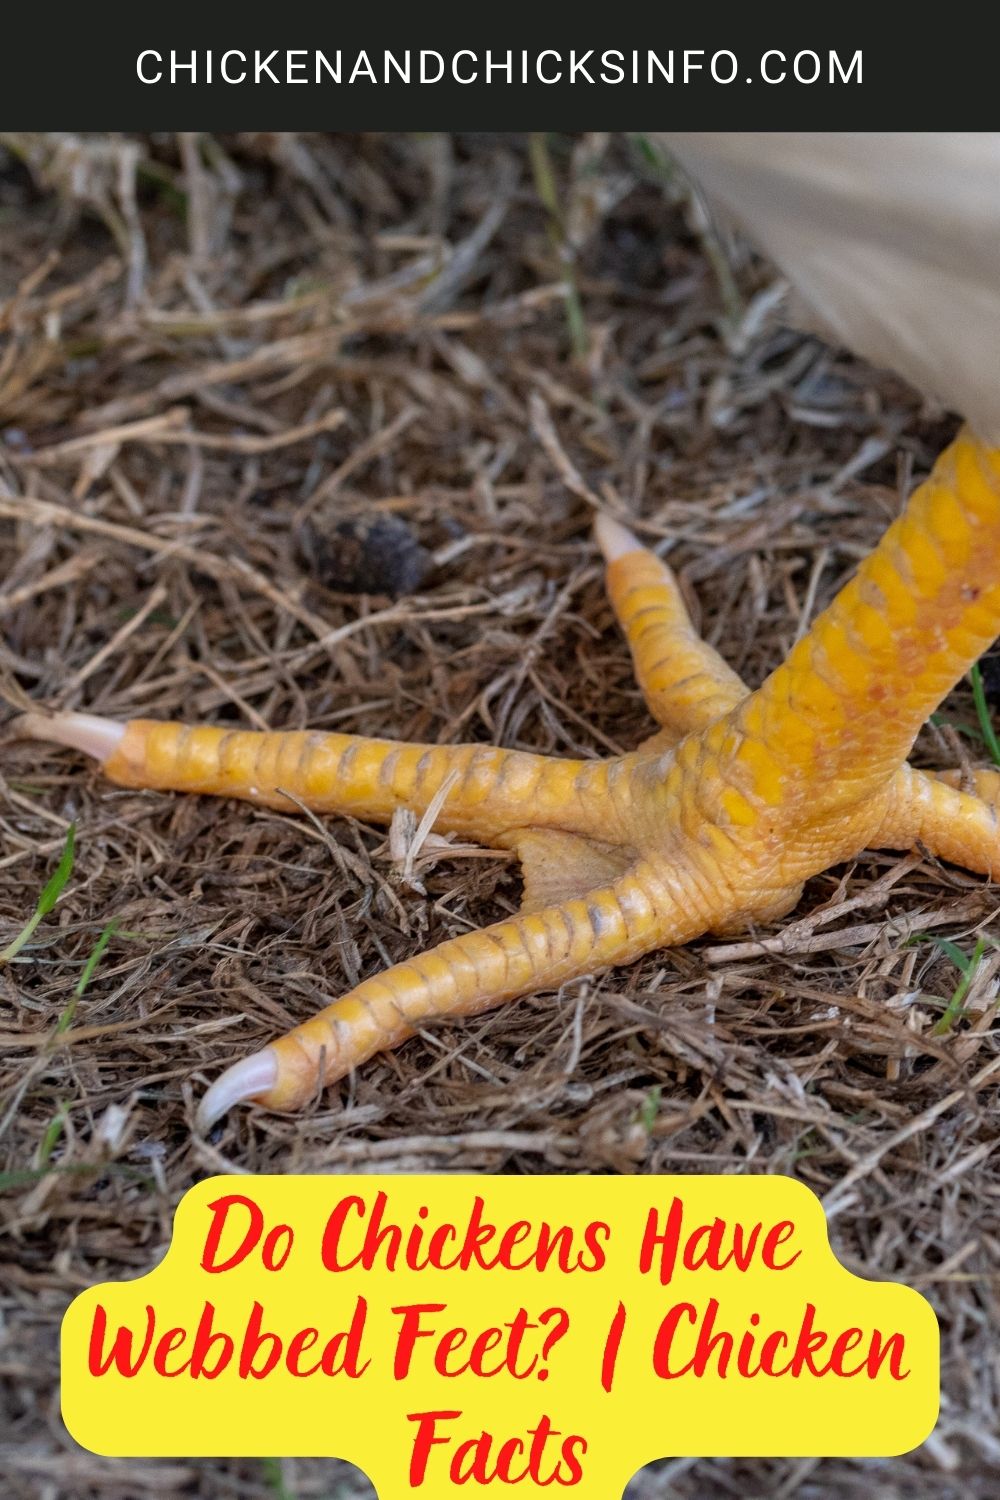 Do Chickens Have Webbed Feet? | Chicken Facts poster.
